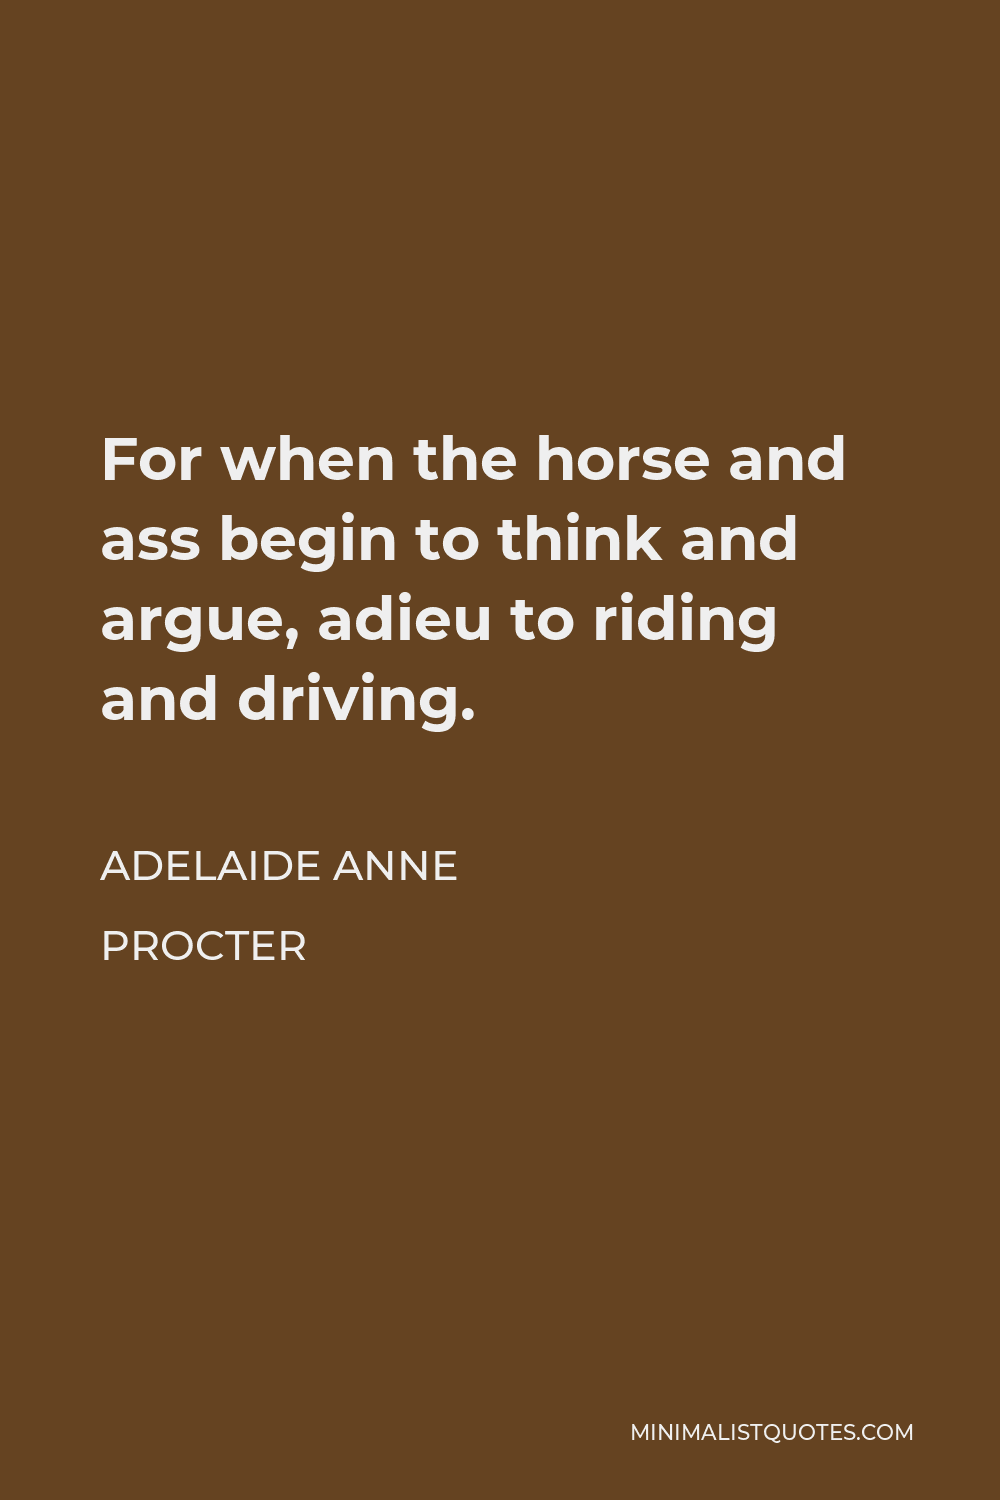 Adelaide Anne Procter Quote - For when the horse and ass begin to think and argue, adieu to riding and driving.